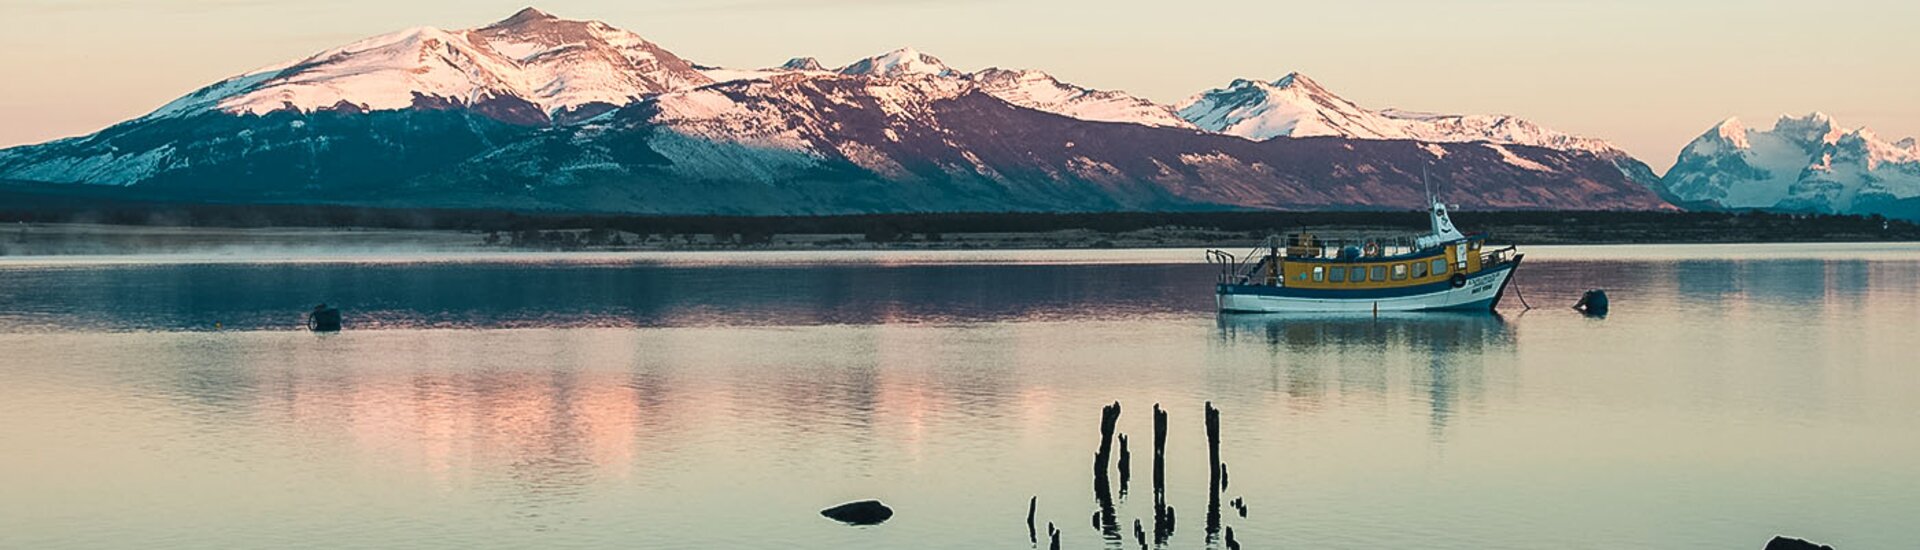 Puerto Natales in Chile